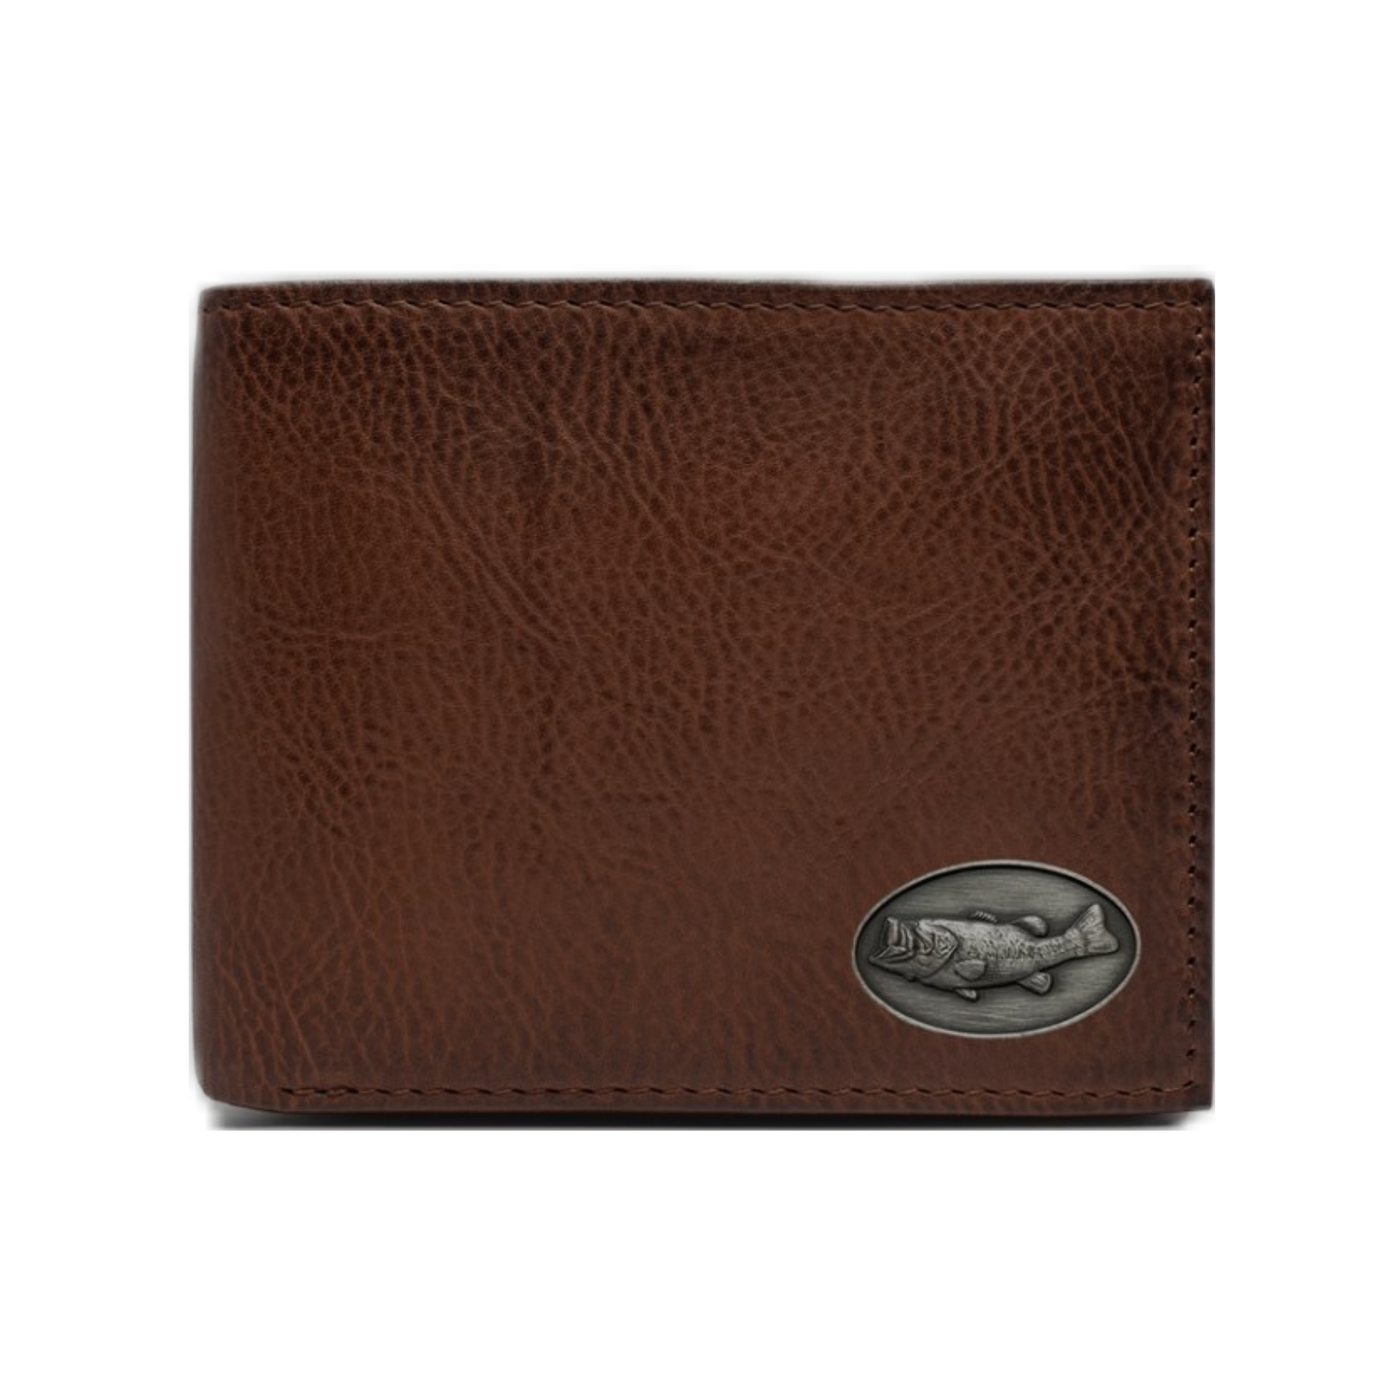 Elegance at its best, our Wildlife Bifold Bass Wallet provides a hand-burnished finish, rich full grain leather, and our signature bass concho. A classic piece to bring to the table, don't miss out! 8 Card Slots 3 Storage Pockets 2 ID Windows Leather Tipped Bill Compartment Dimensions: 4.5"L x 3.5"H RFID Protection Color: Caramel